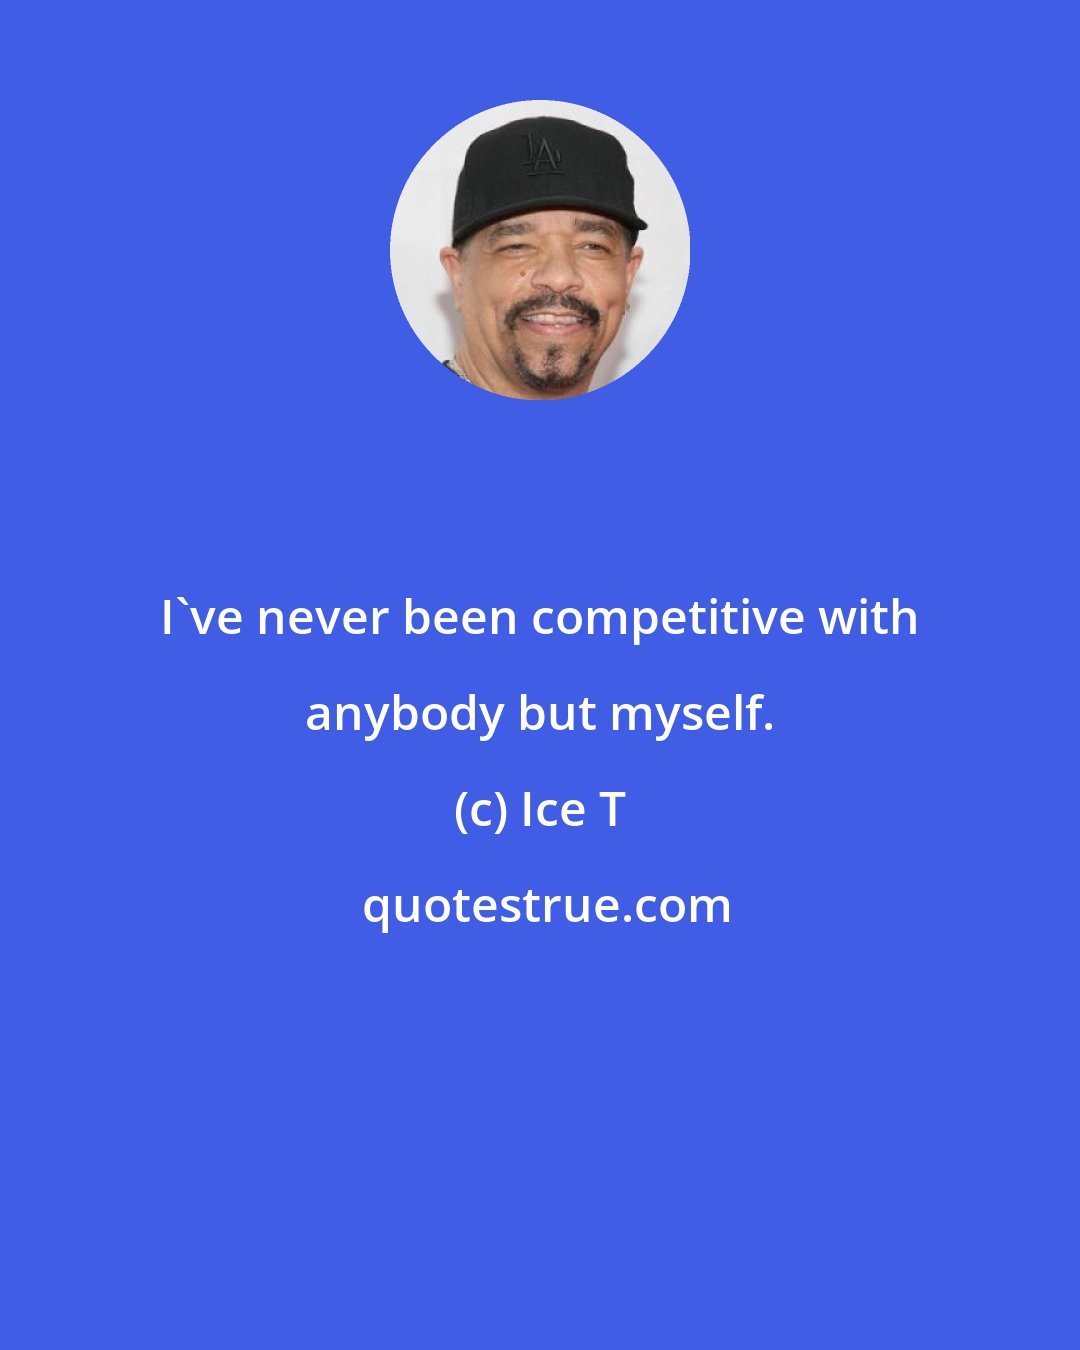 Ice T: I've never been competitive with anybody but myself.